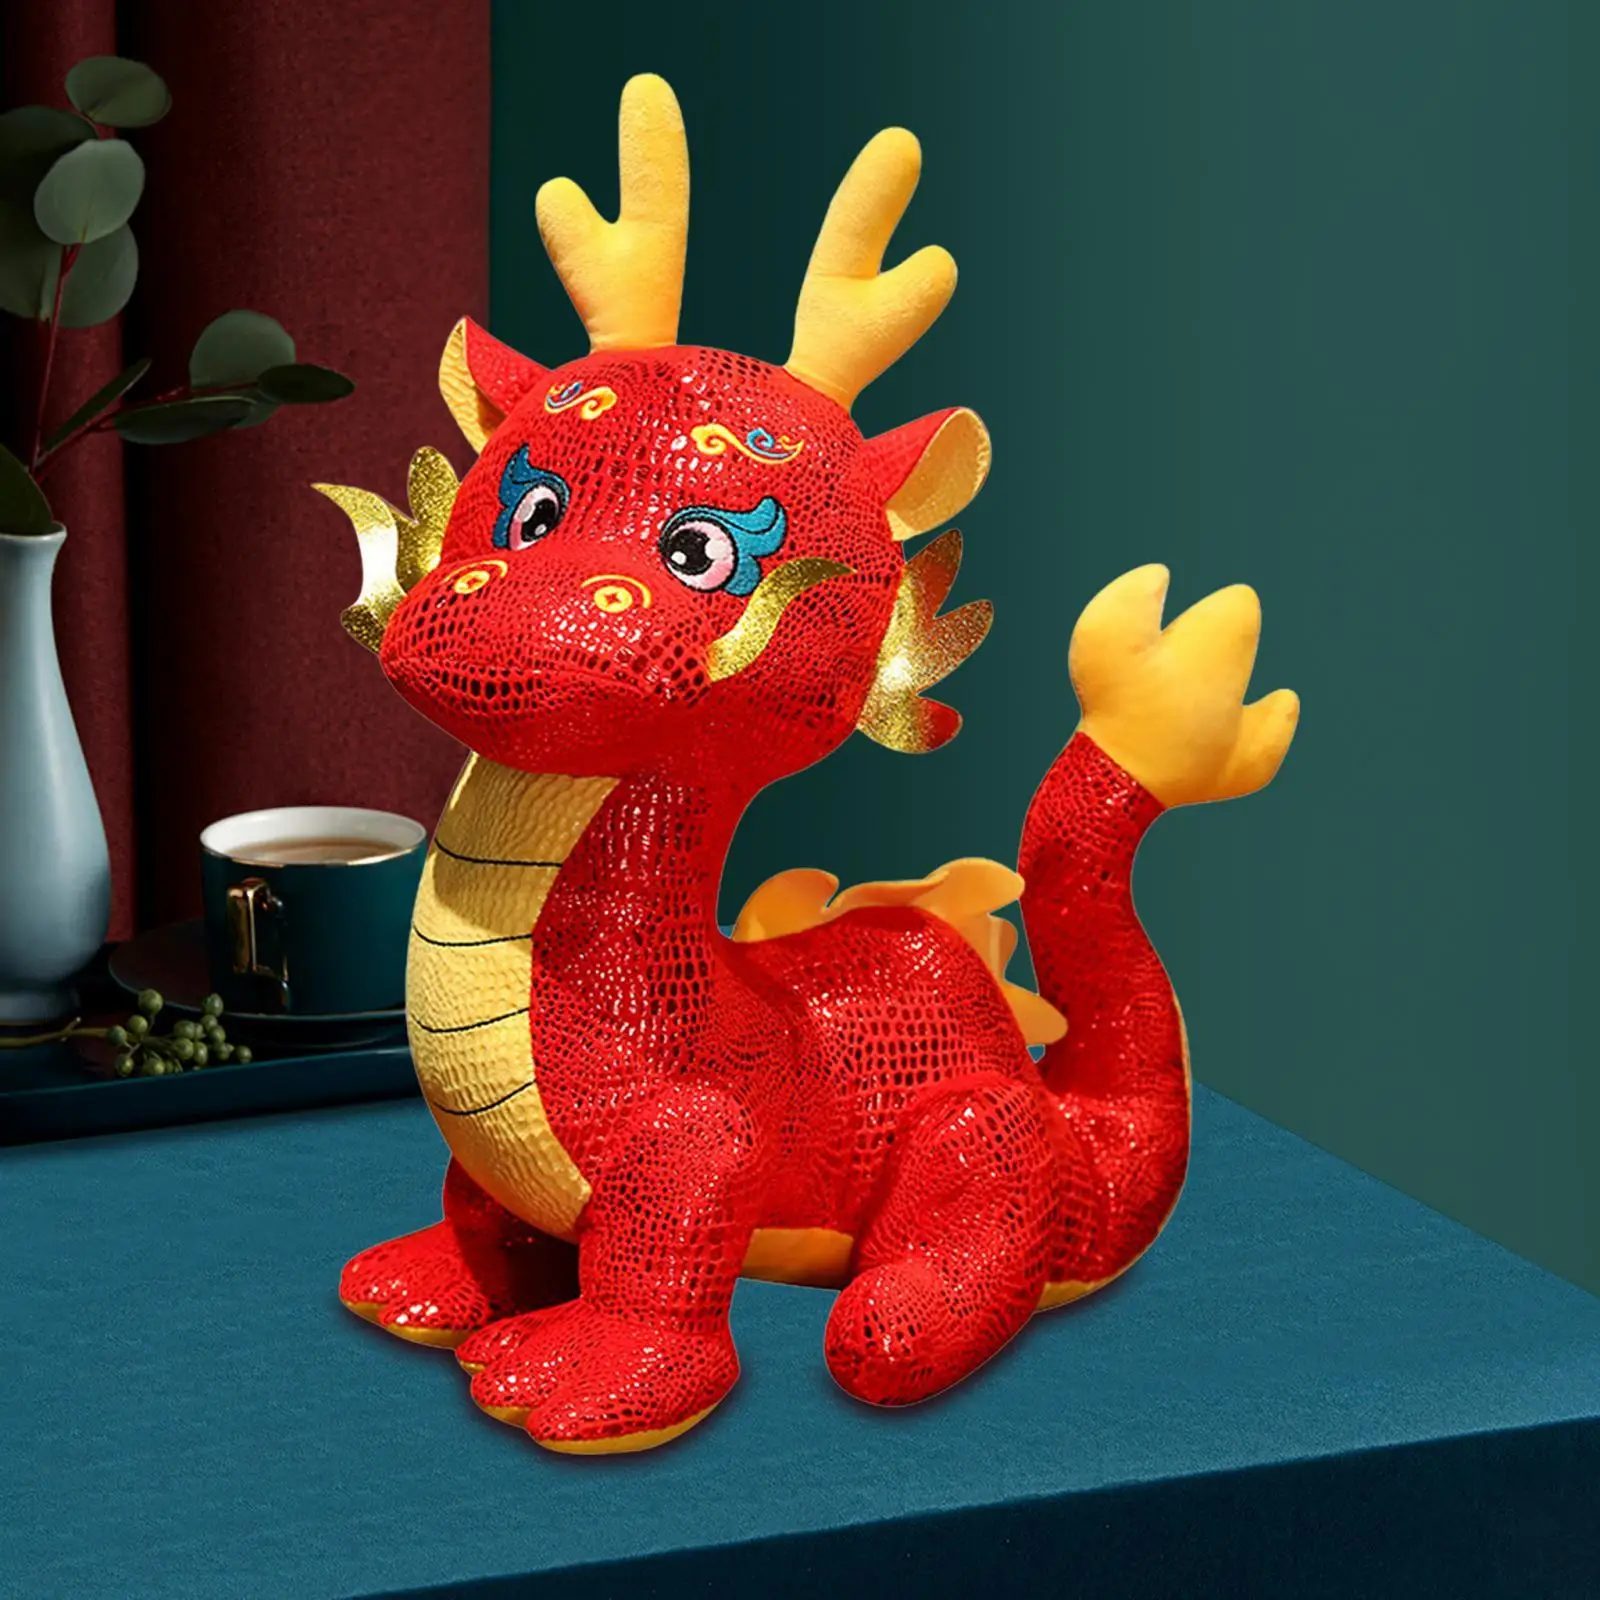 Chinese Dragon Plush Toy New Year Stuffed Dragon Animal Doll Cute Throw Pillow for Party Bedroom Living Room Holiday Decoration